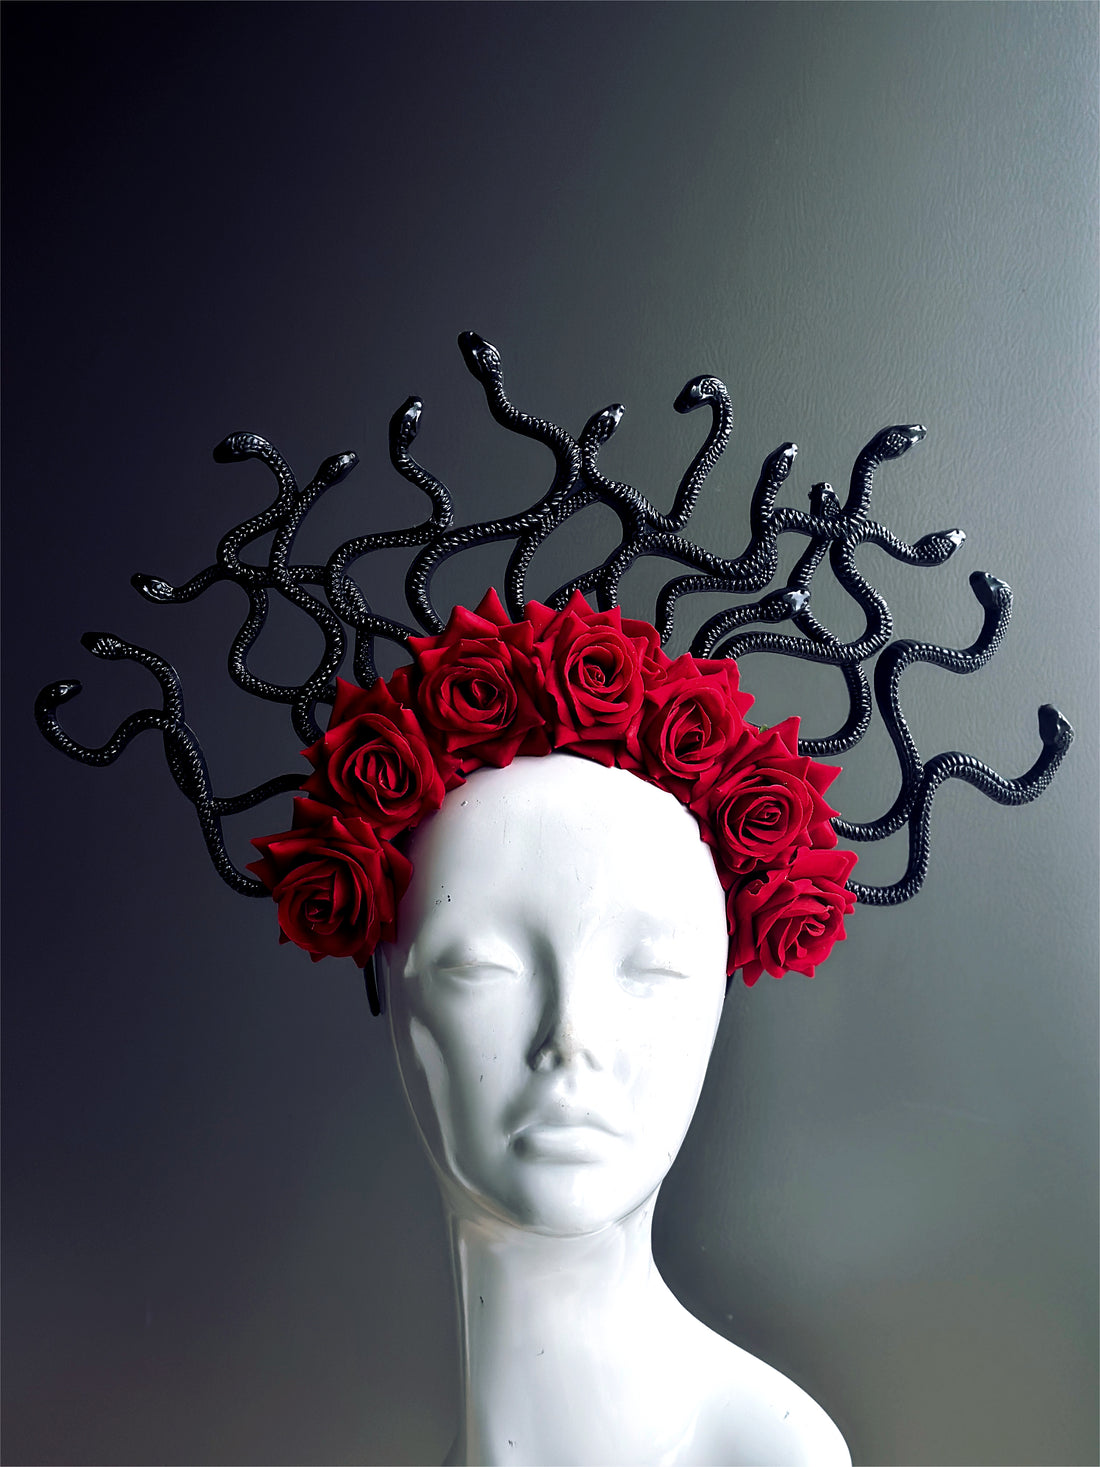 Medusa snake headpiece in black with red roses for sale.